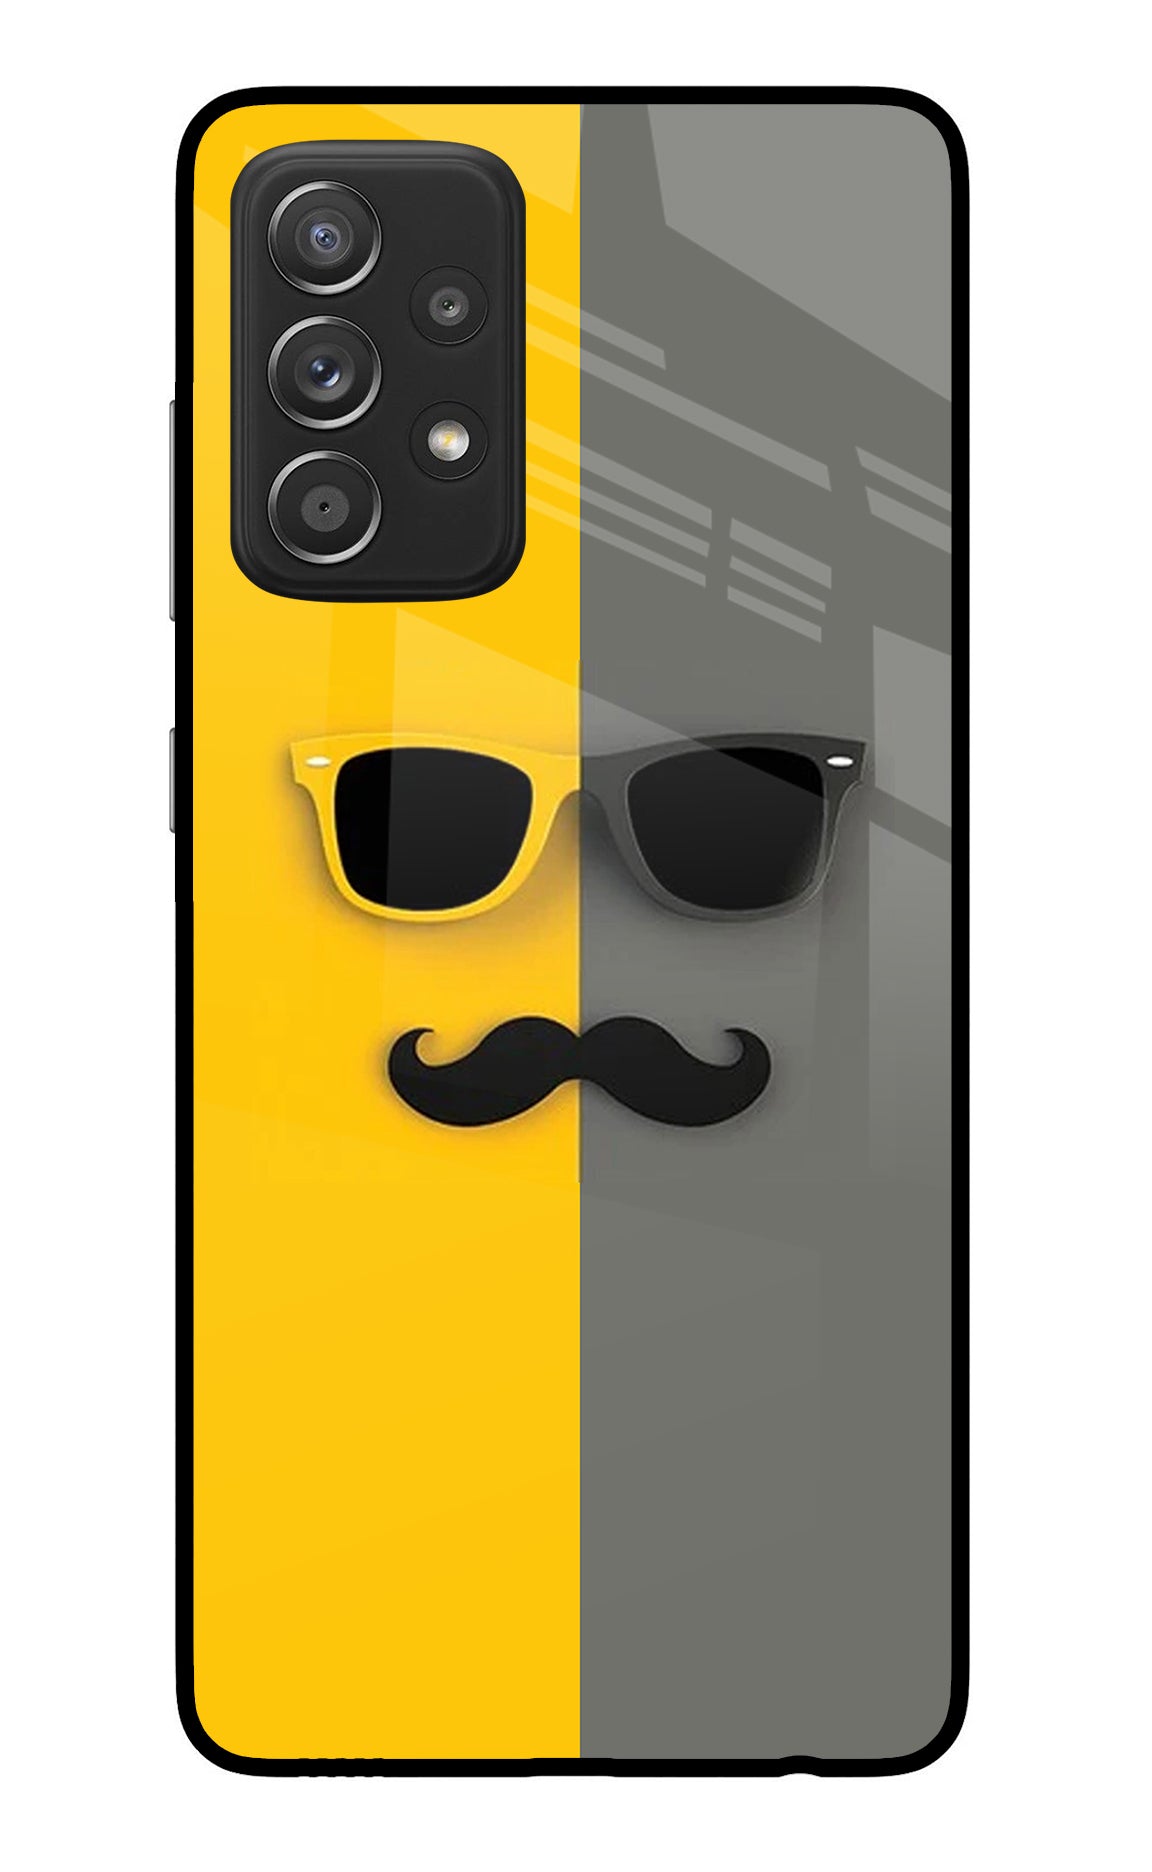 Sunglasses with Mustache Samsung A52/A52s 5G Glass Case